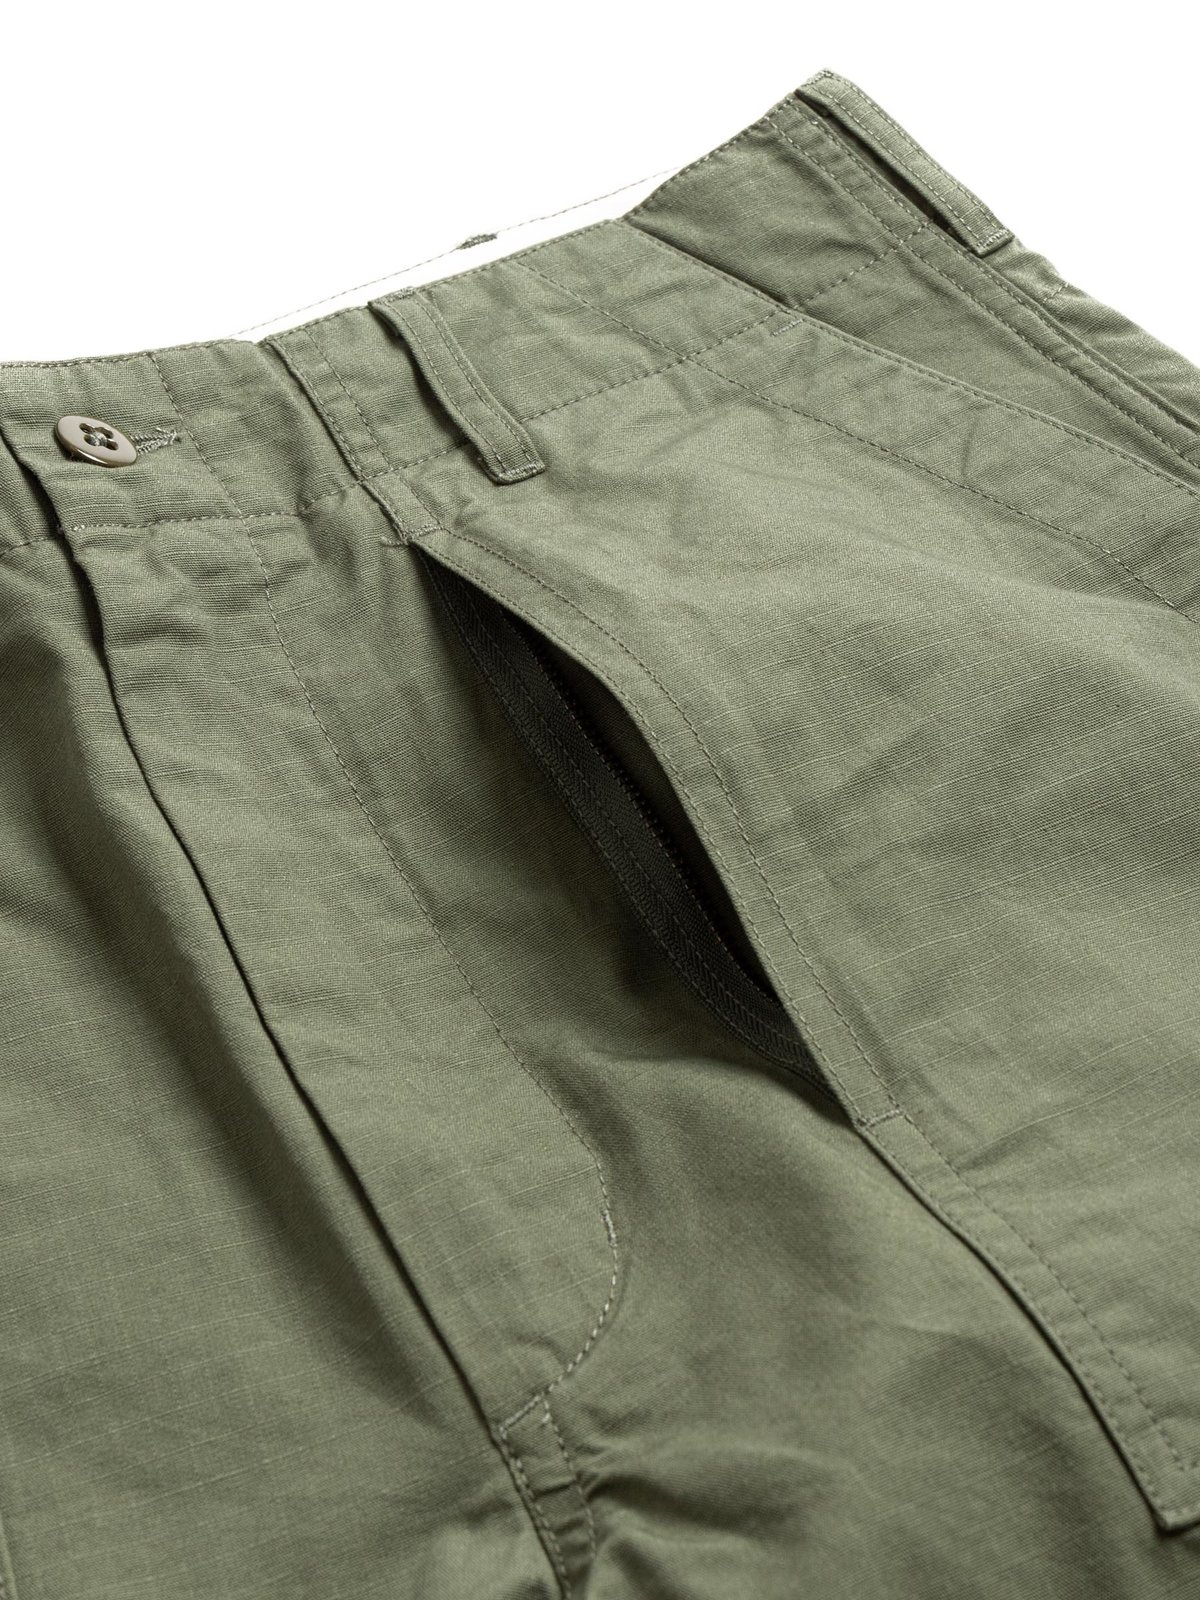 FATIGUE PANT OLIVE COTTON RIPSTOP - Image 3